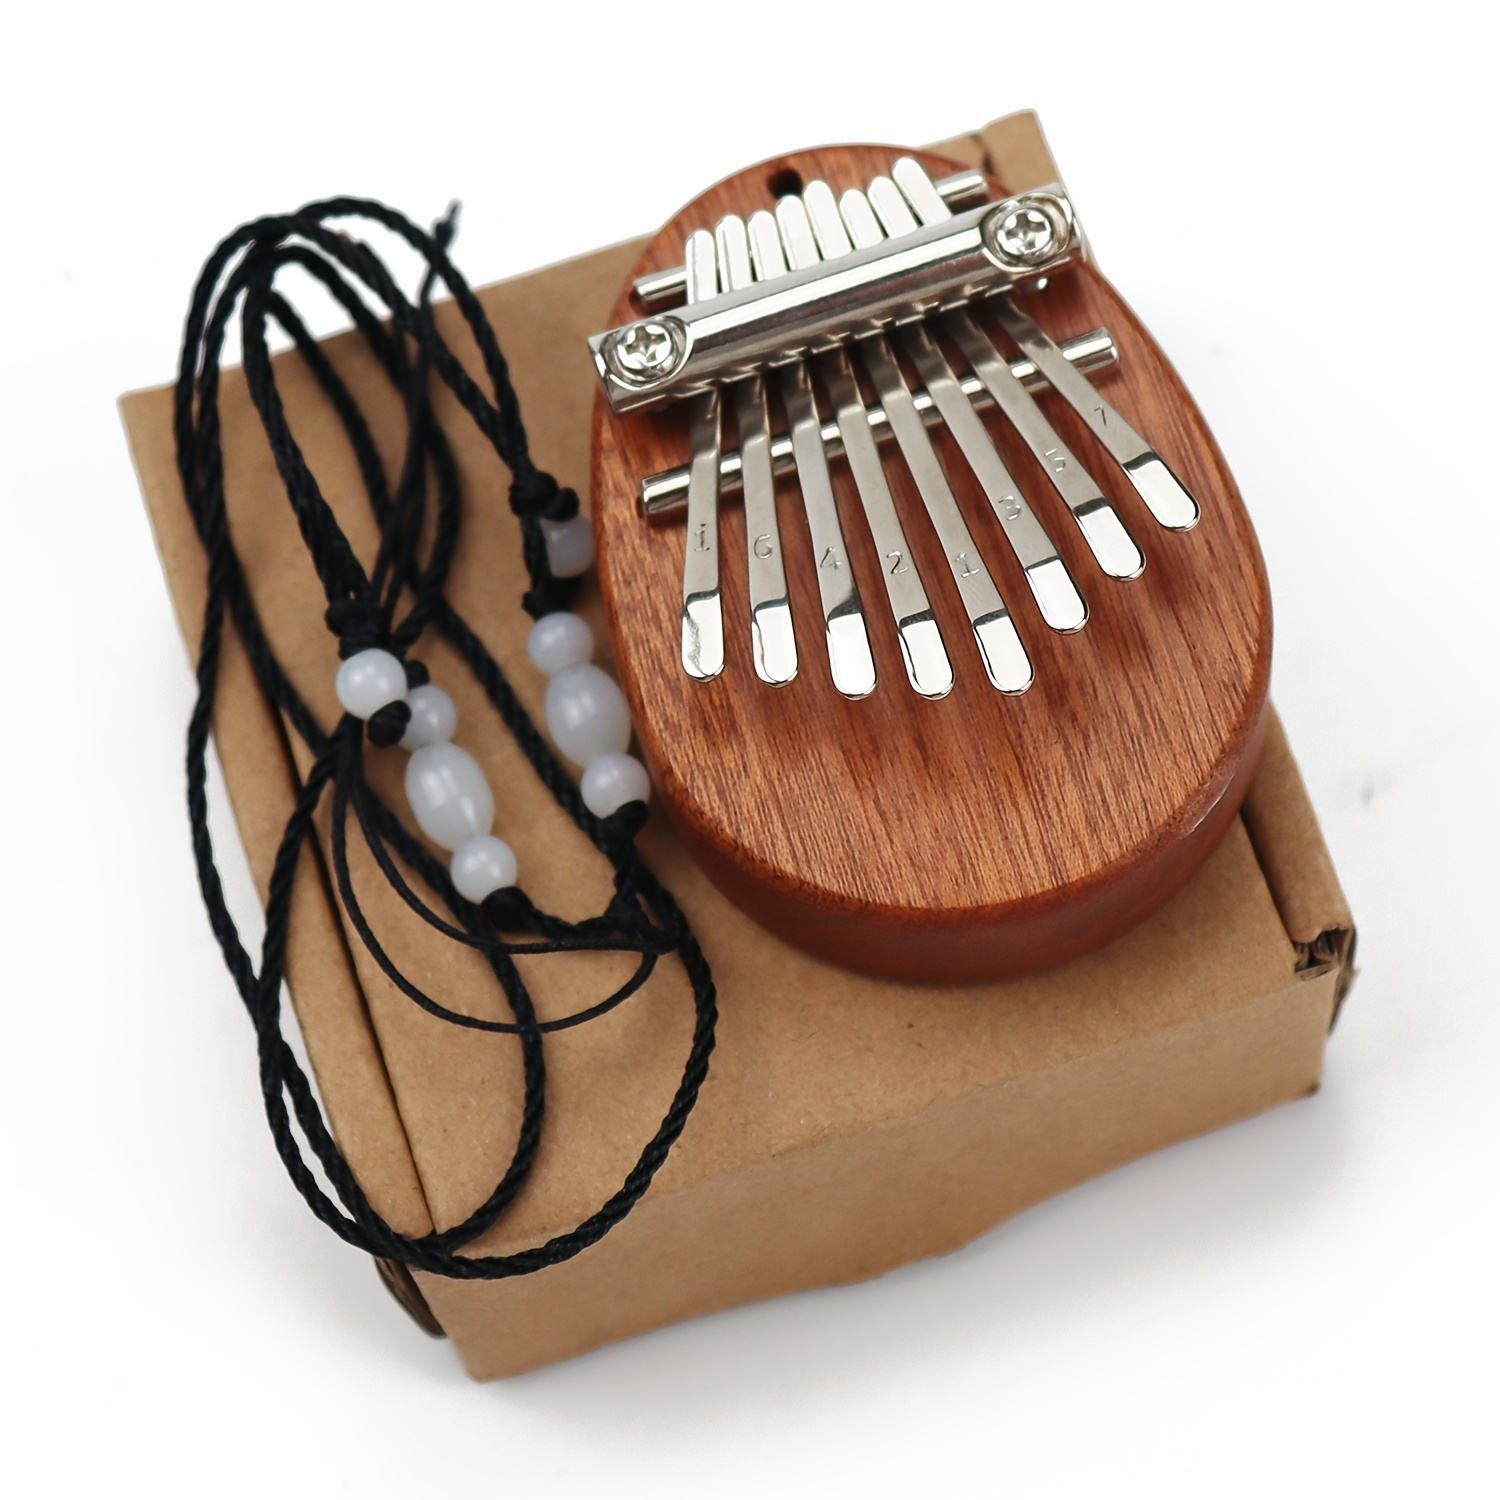 

8-key Mini Wooden Kalimba Finger Piano: The Perfect Portable Instrument For Beginners!